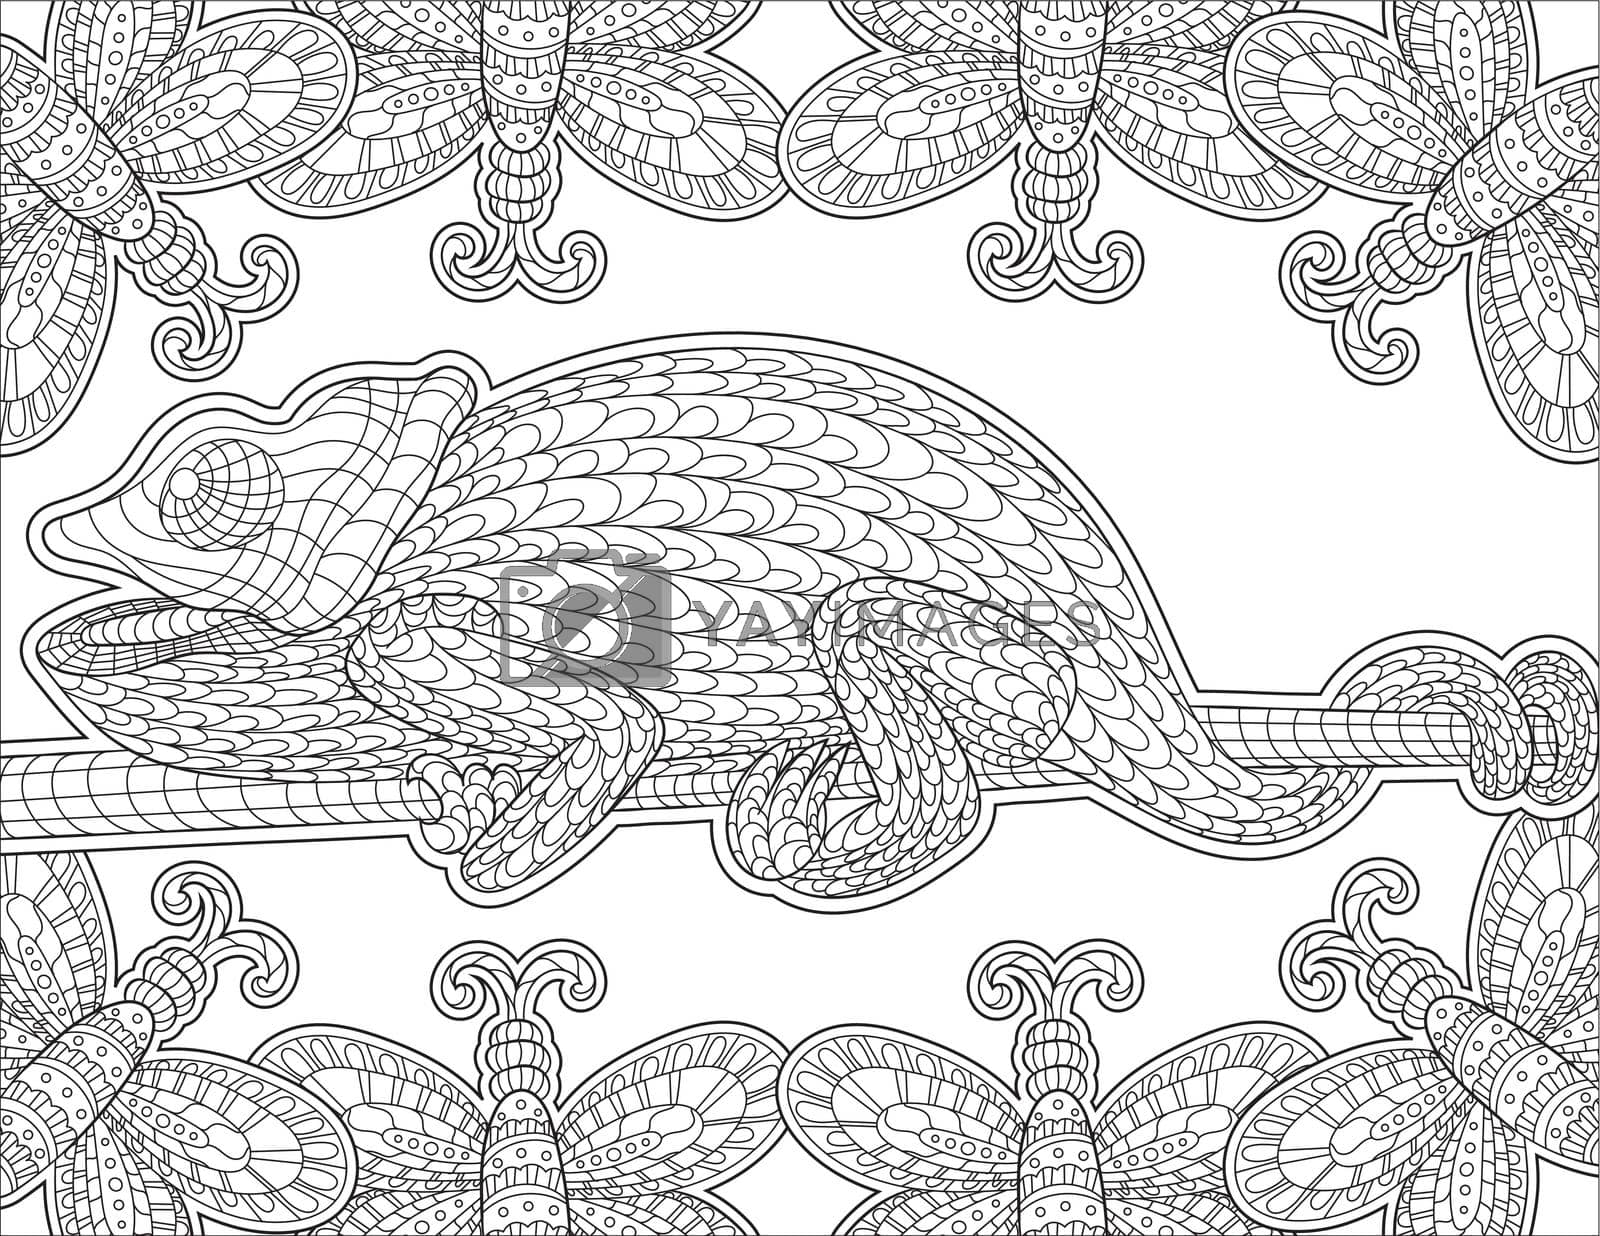 Royalty free image of Chameleon Line Drawing Surreounded With Butterfly Frame For Detailed Colouring Book by nialowwa